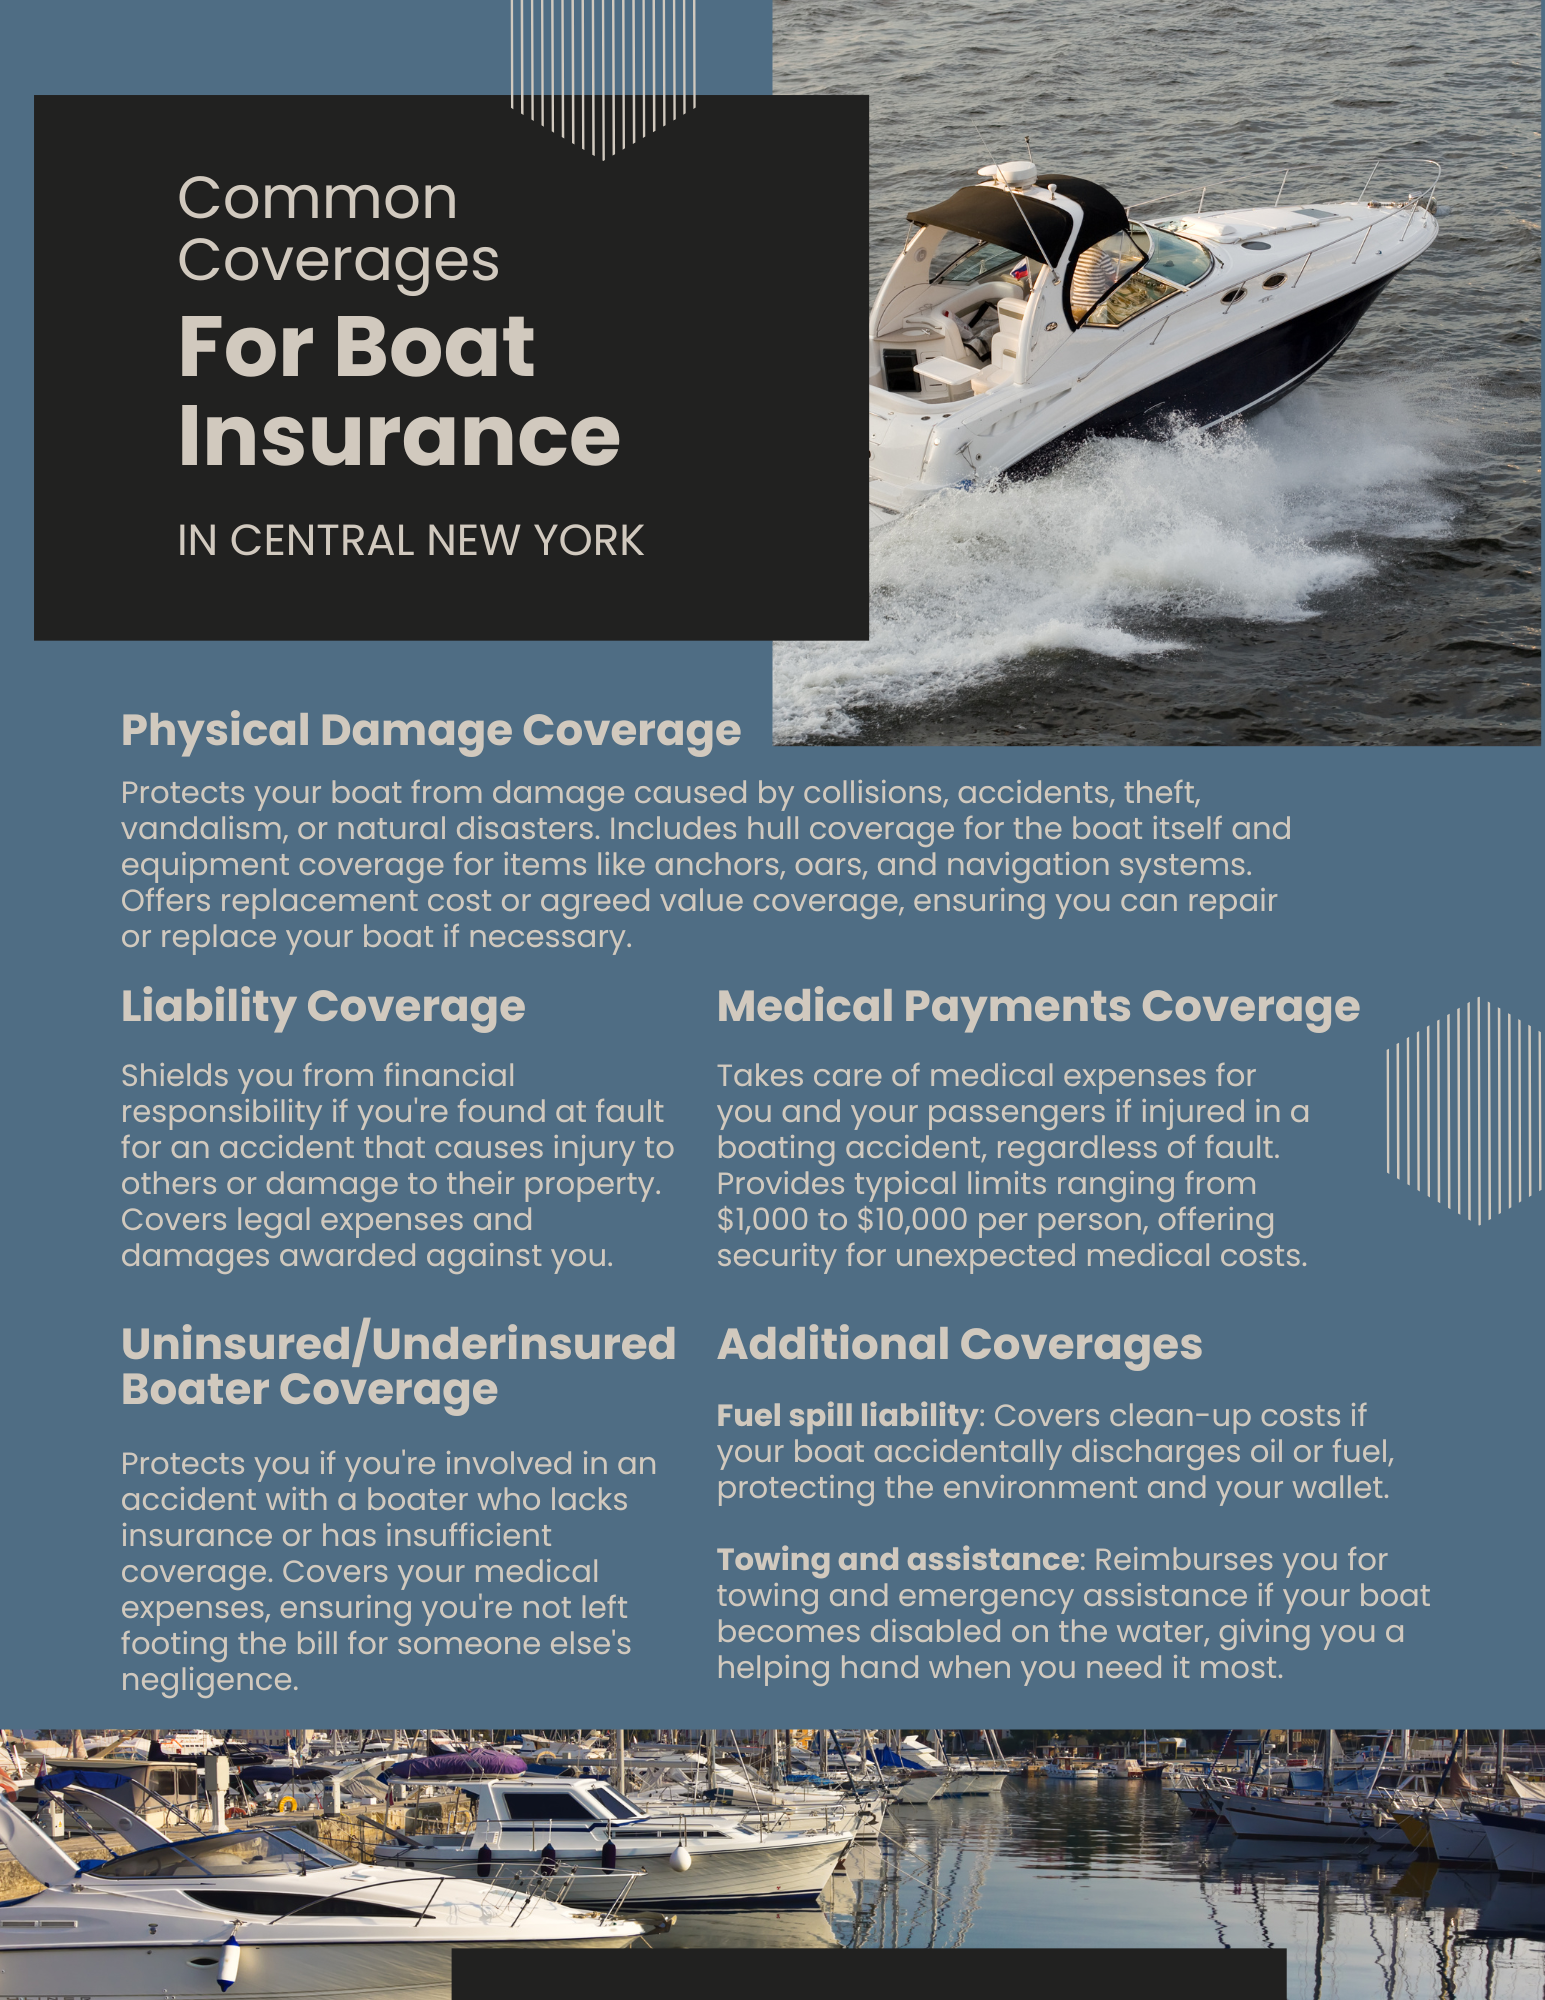 Common coverages for boat insurance in Central New York